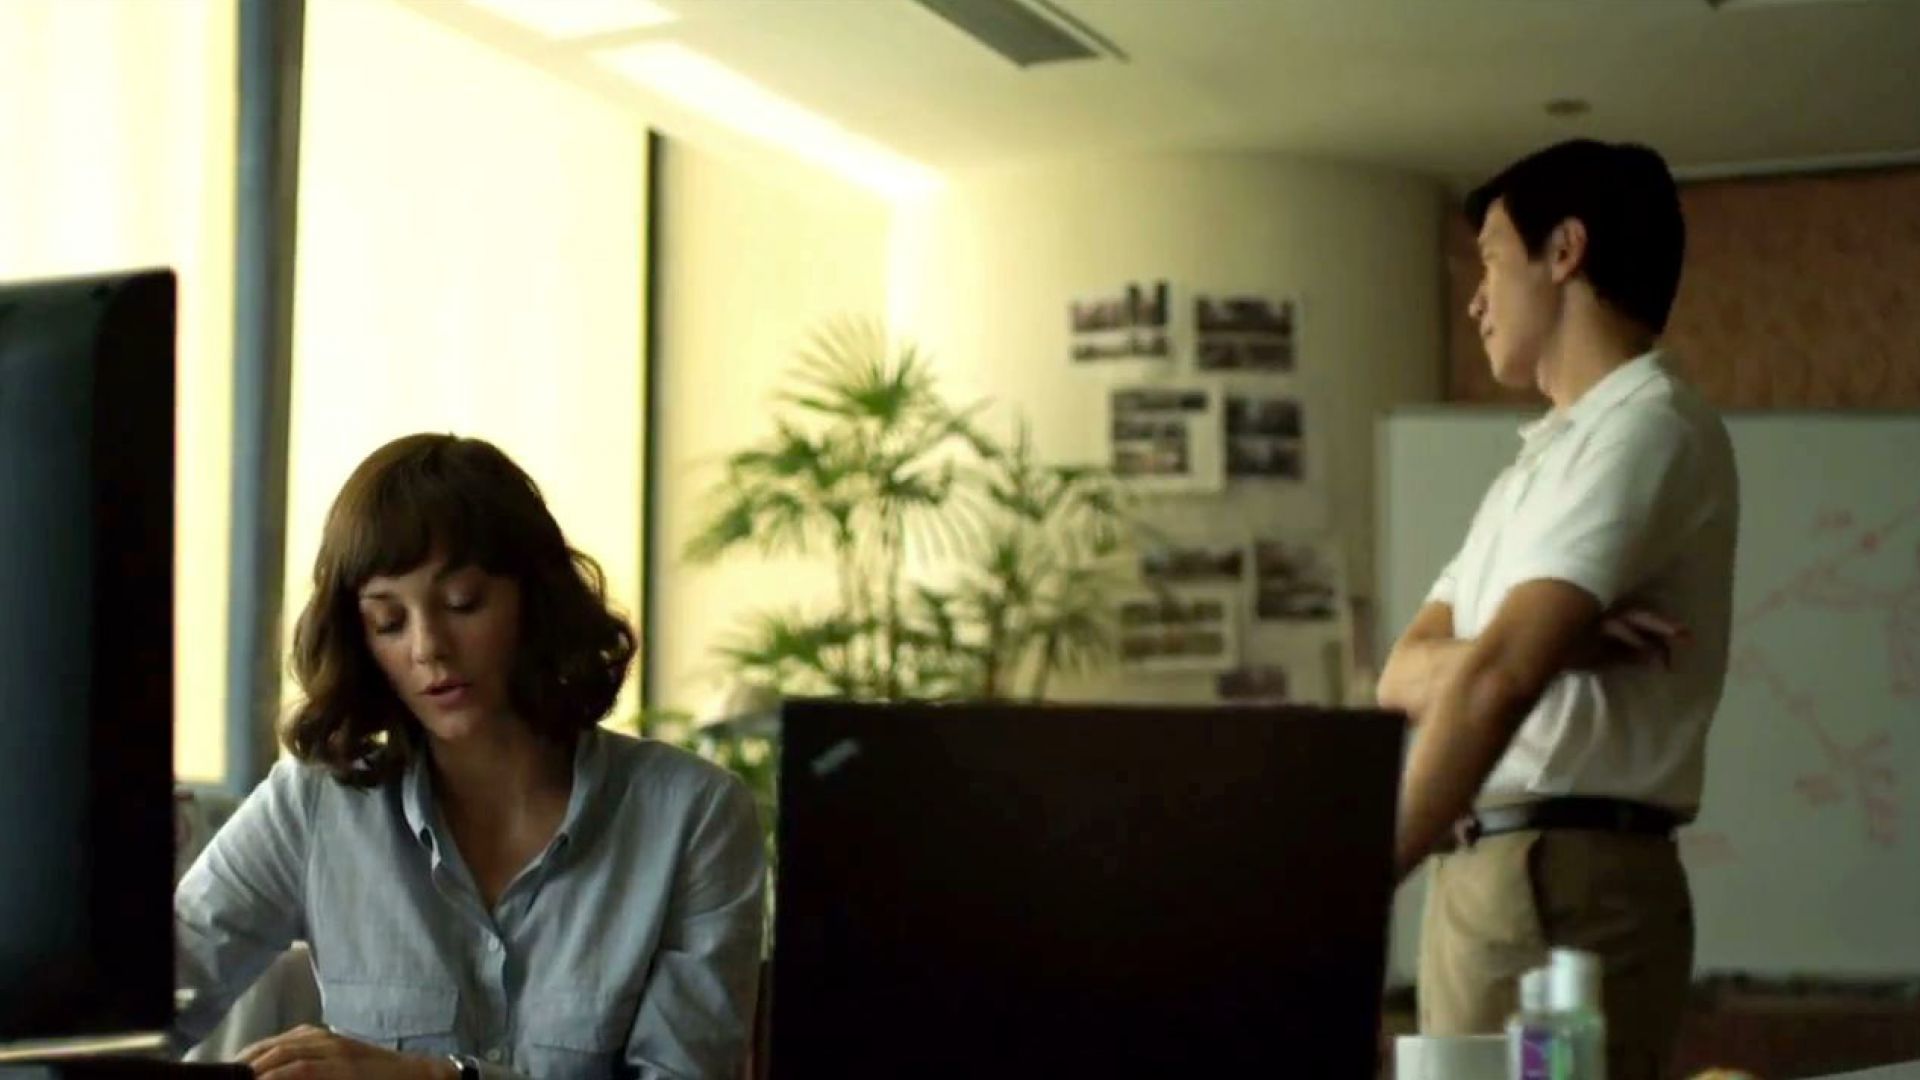 Marion Cotillard traces the index patient in Contagion